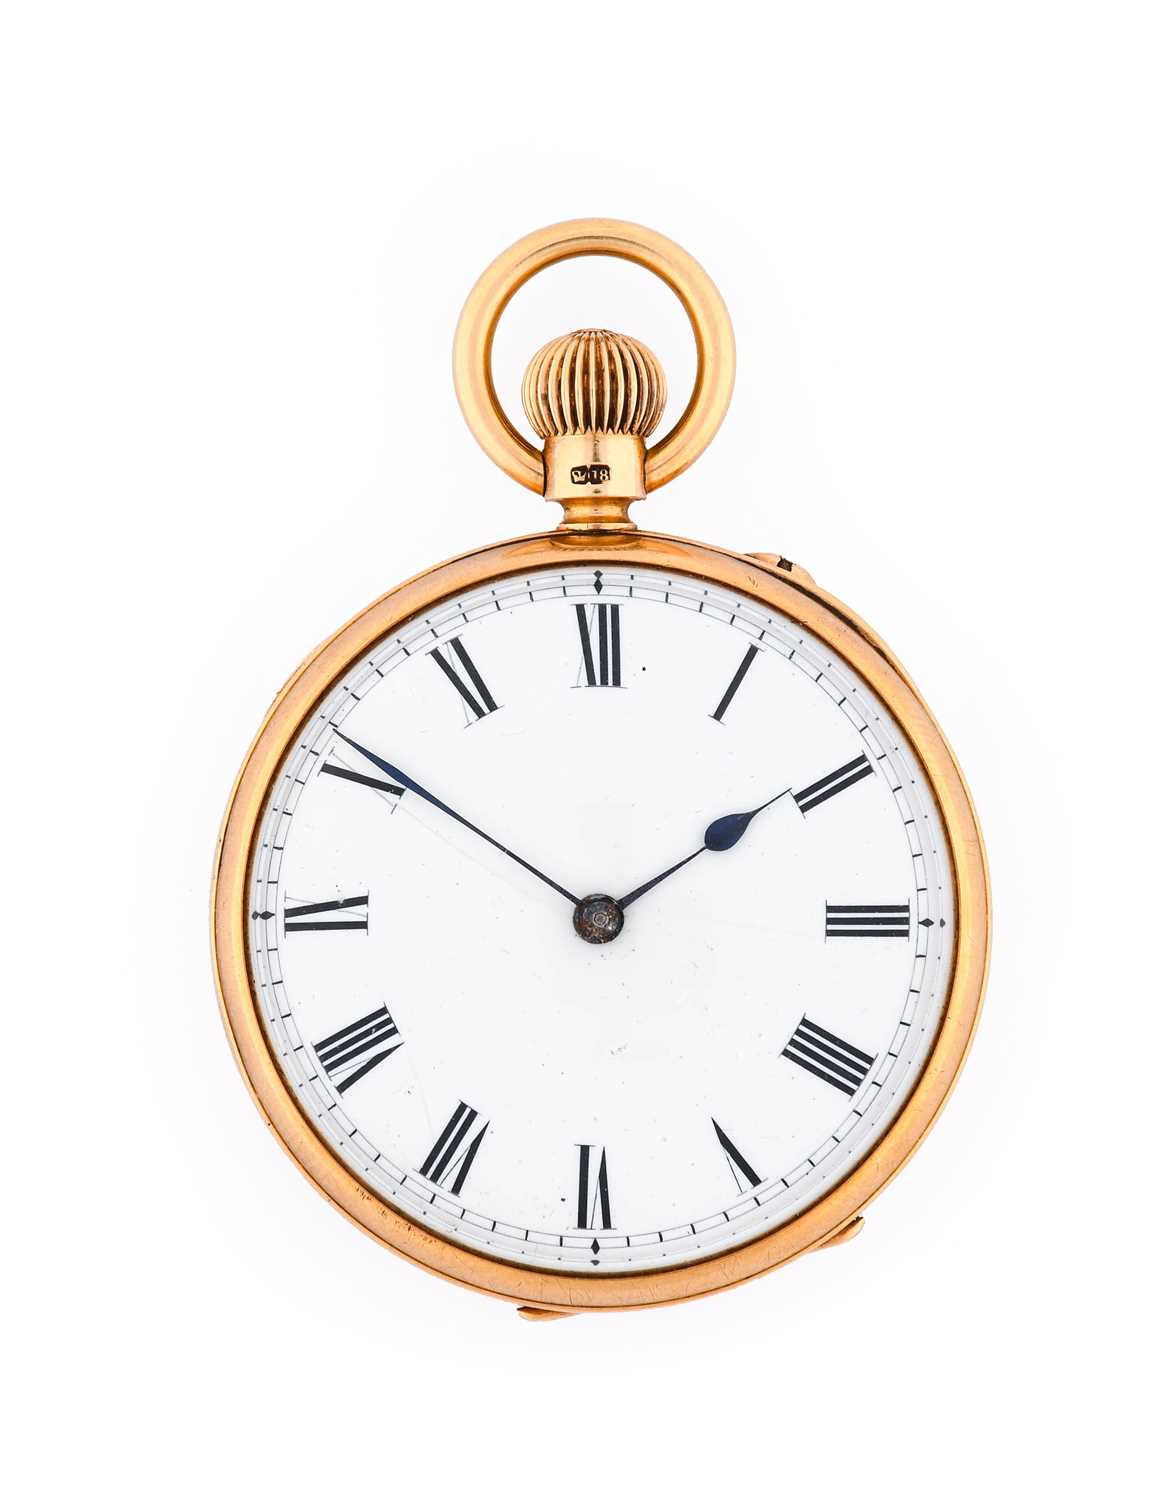 Rhodes & Sons: An 18 Carat Gold Open Faced Pocket Watch, retailed by M.Rhodes & Sons, Bradford &